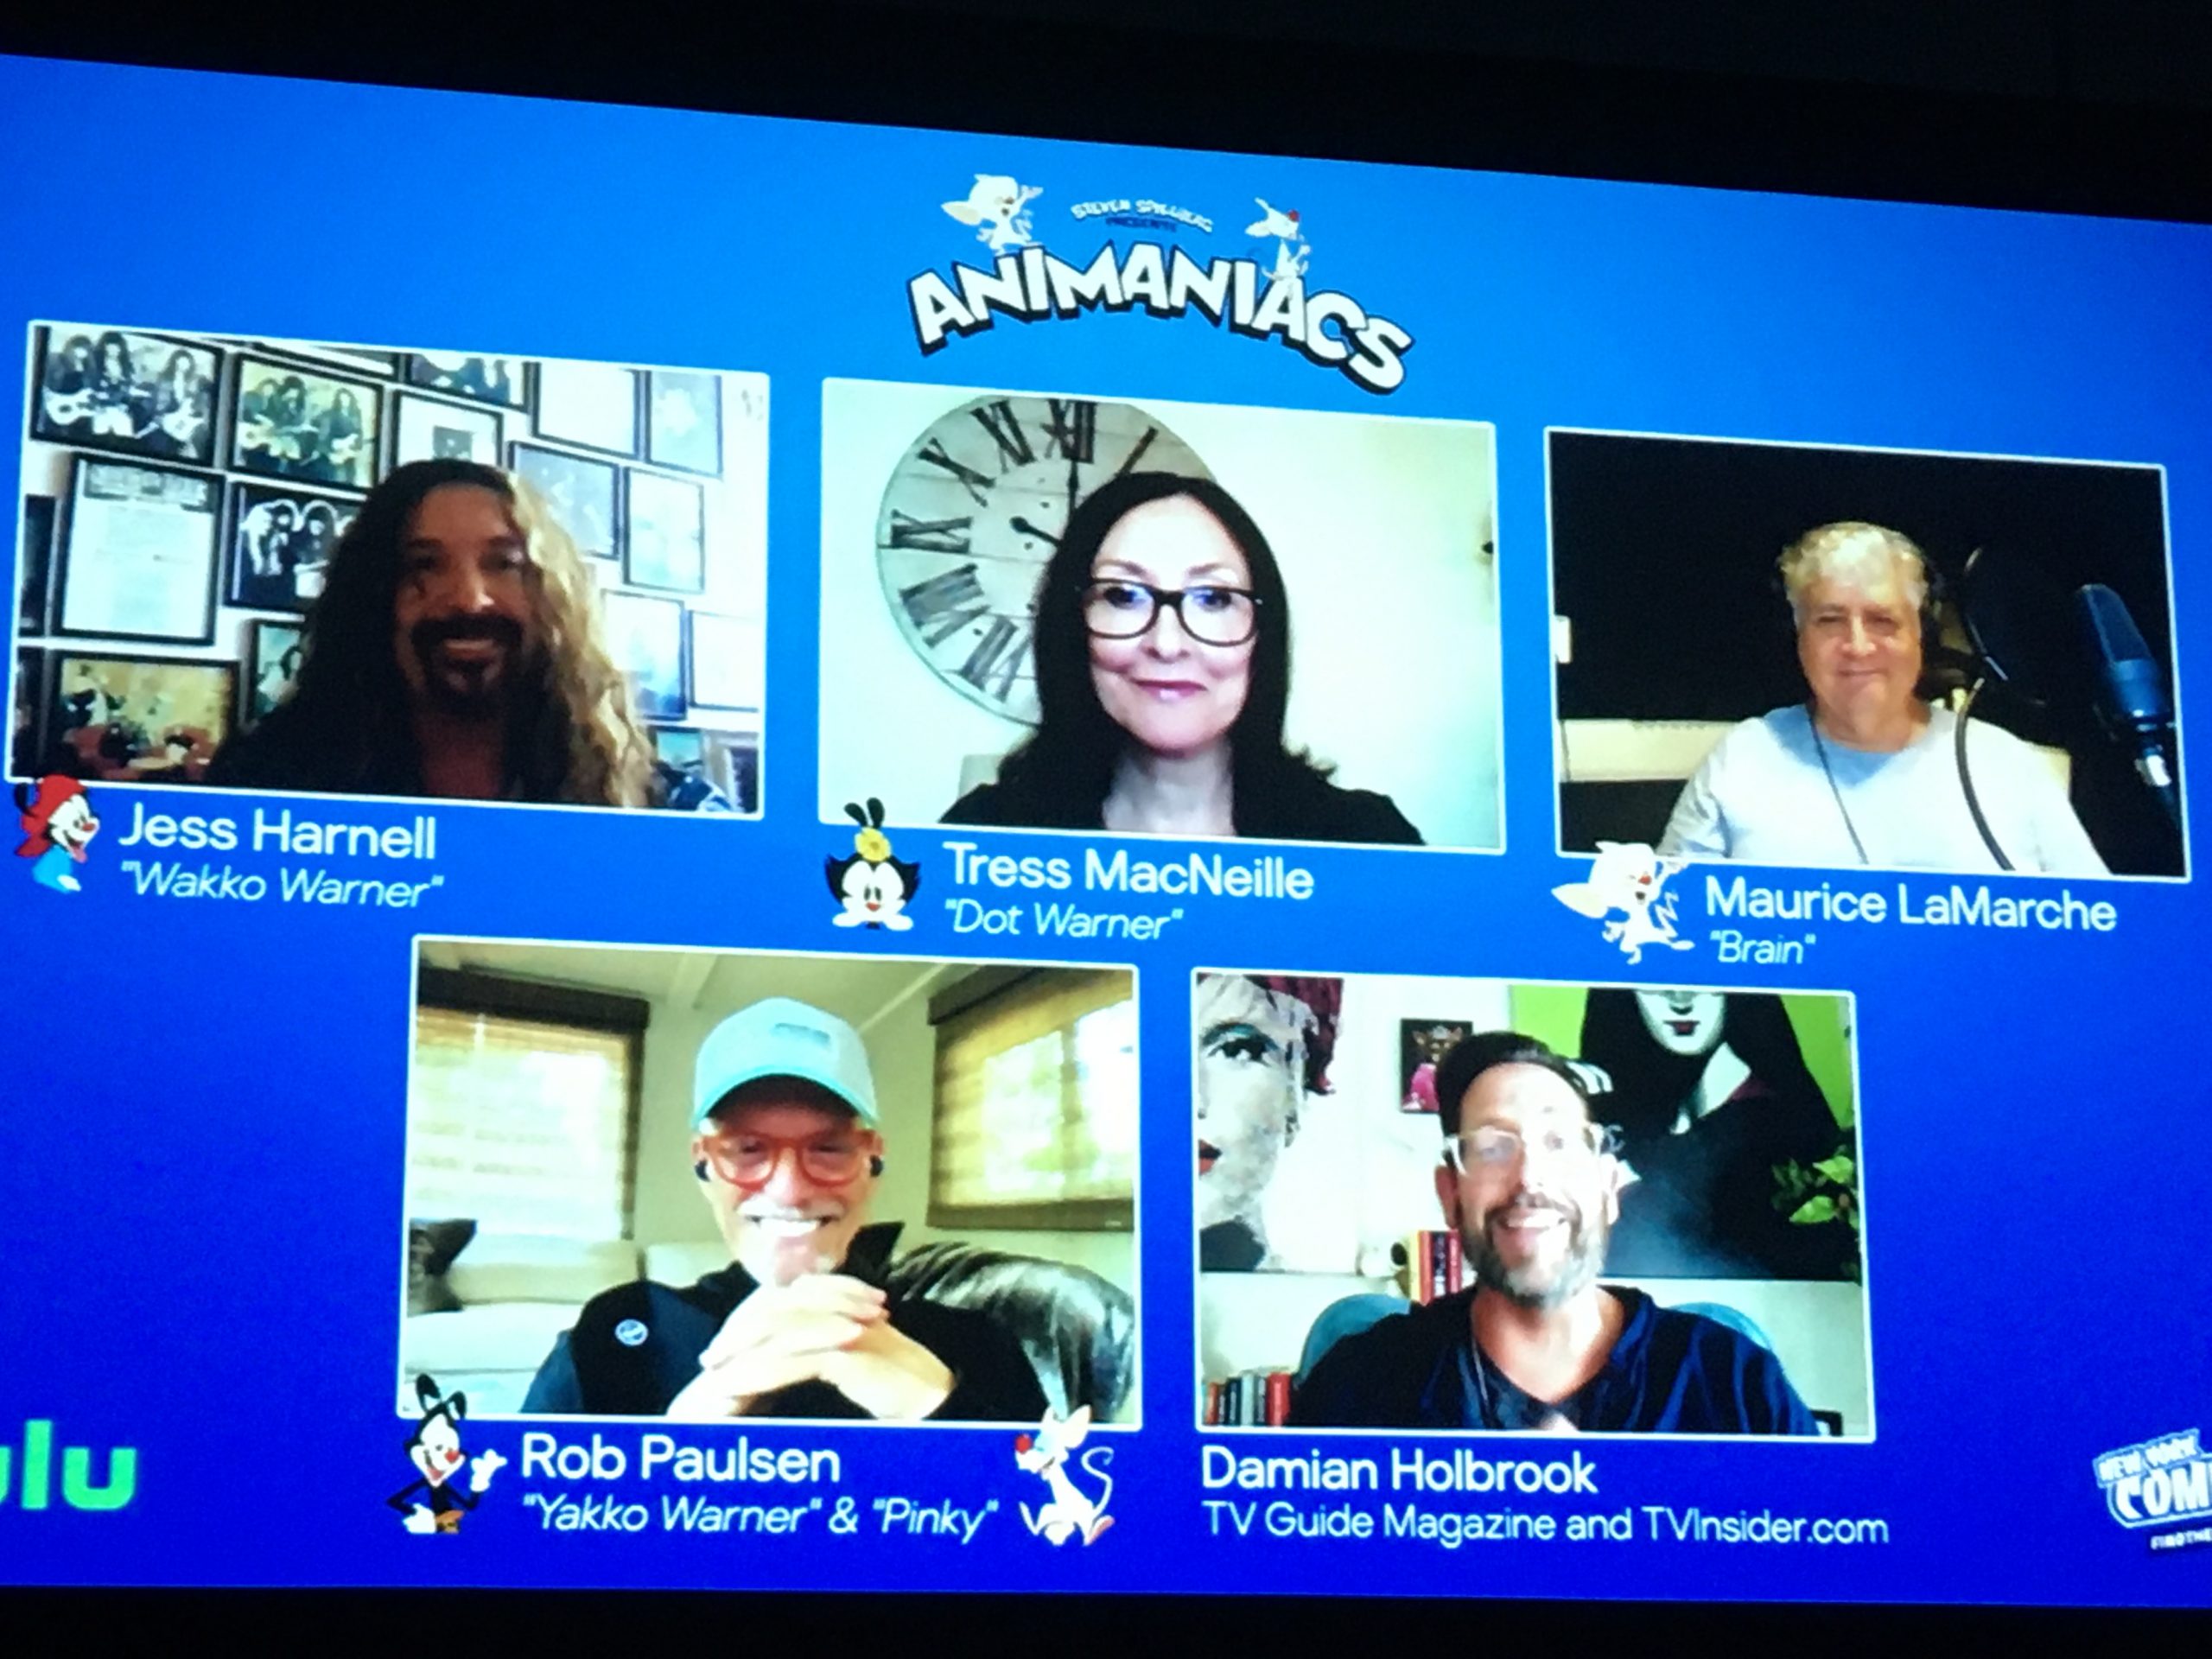 NYCC '21: It's time again for Animaniacs!